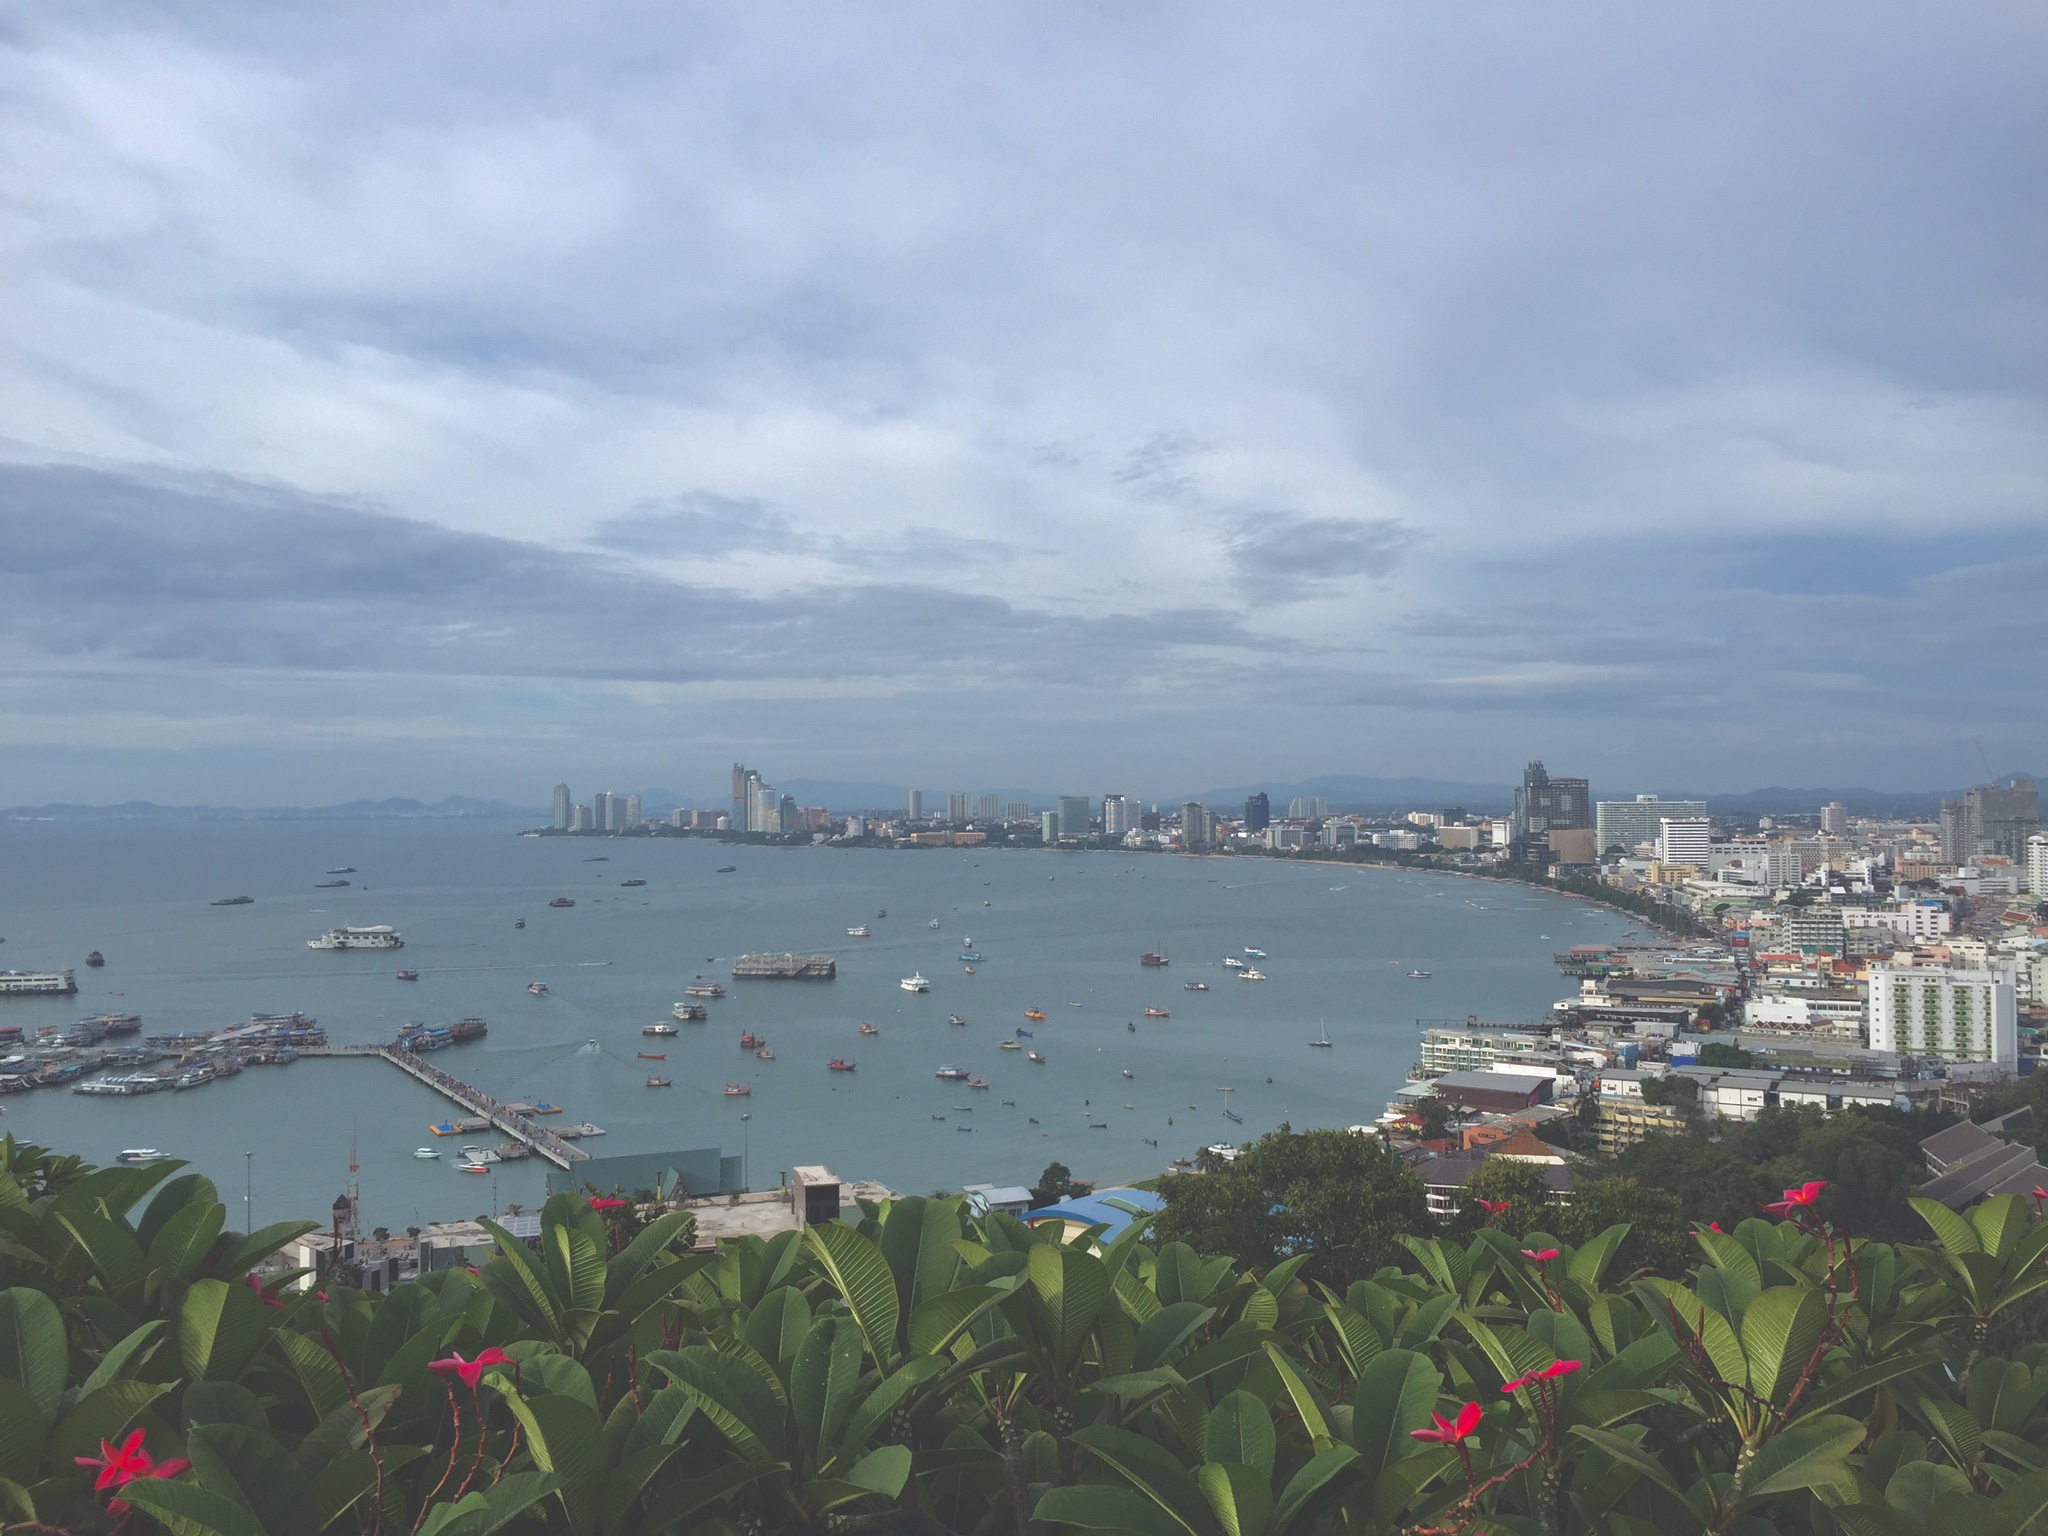 Pattaya City - Thailand! Where The Girls And Ladyboys Are